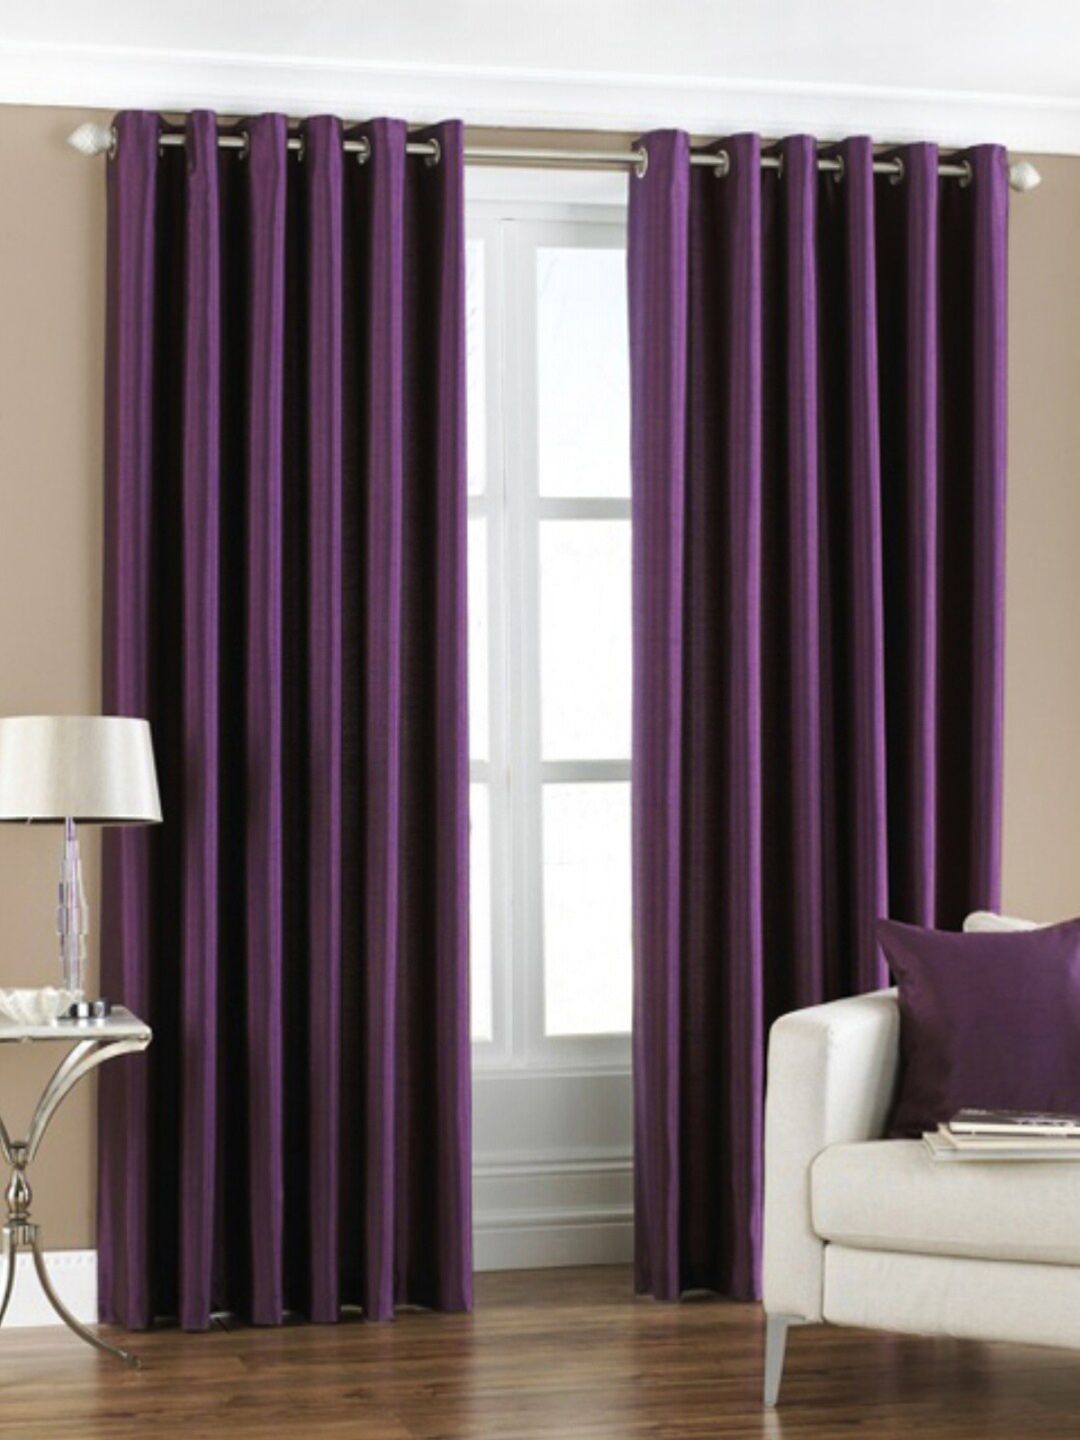 Homefab India Set of 2 Long Door Curtains Price in India